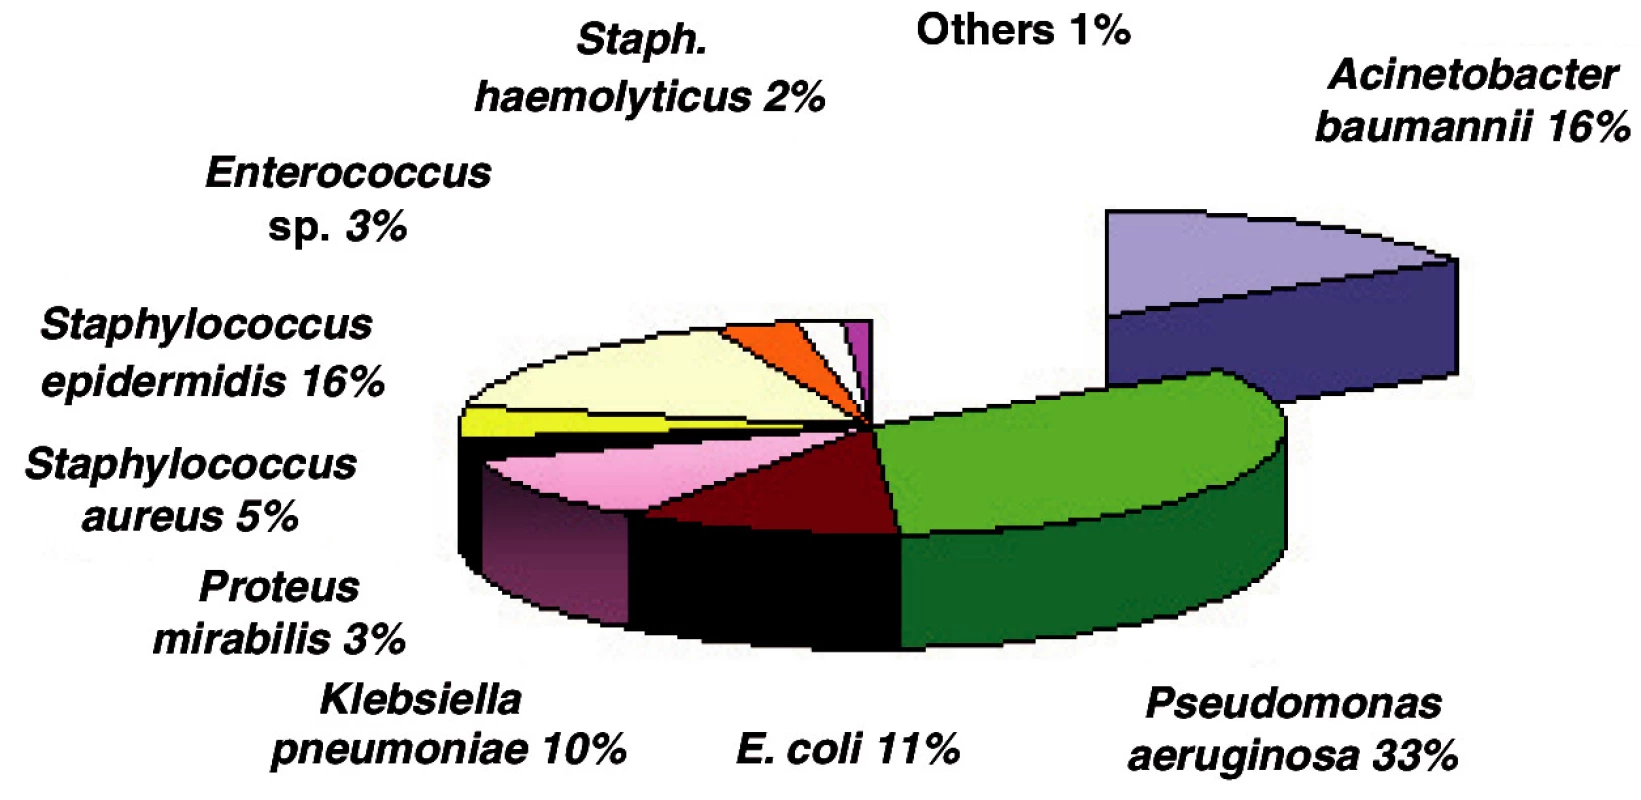 Incidence of bacterial strains in ICU in 2006